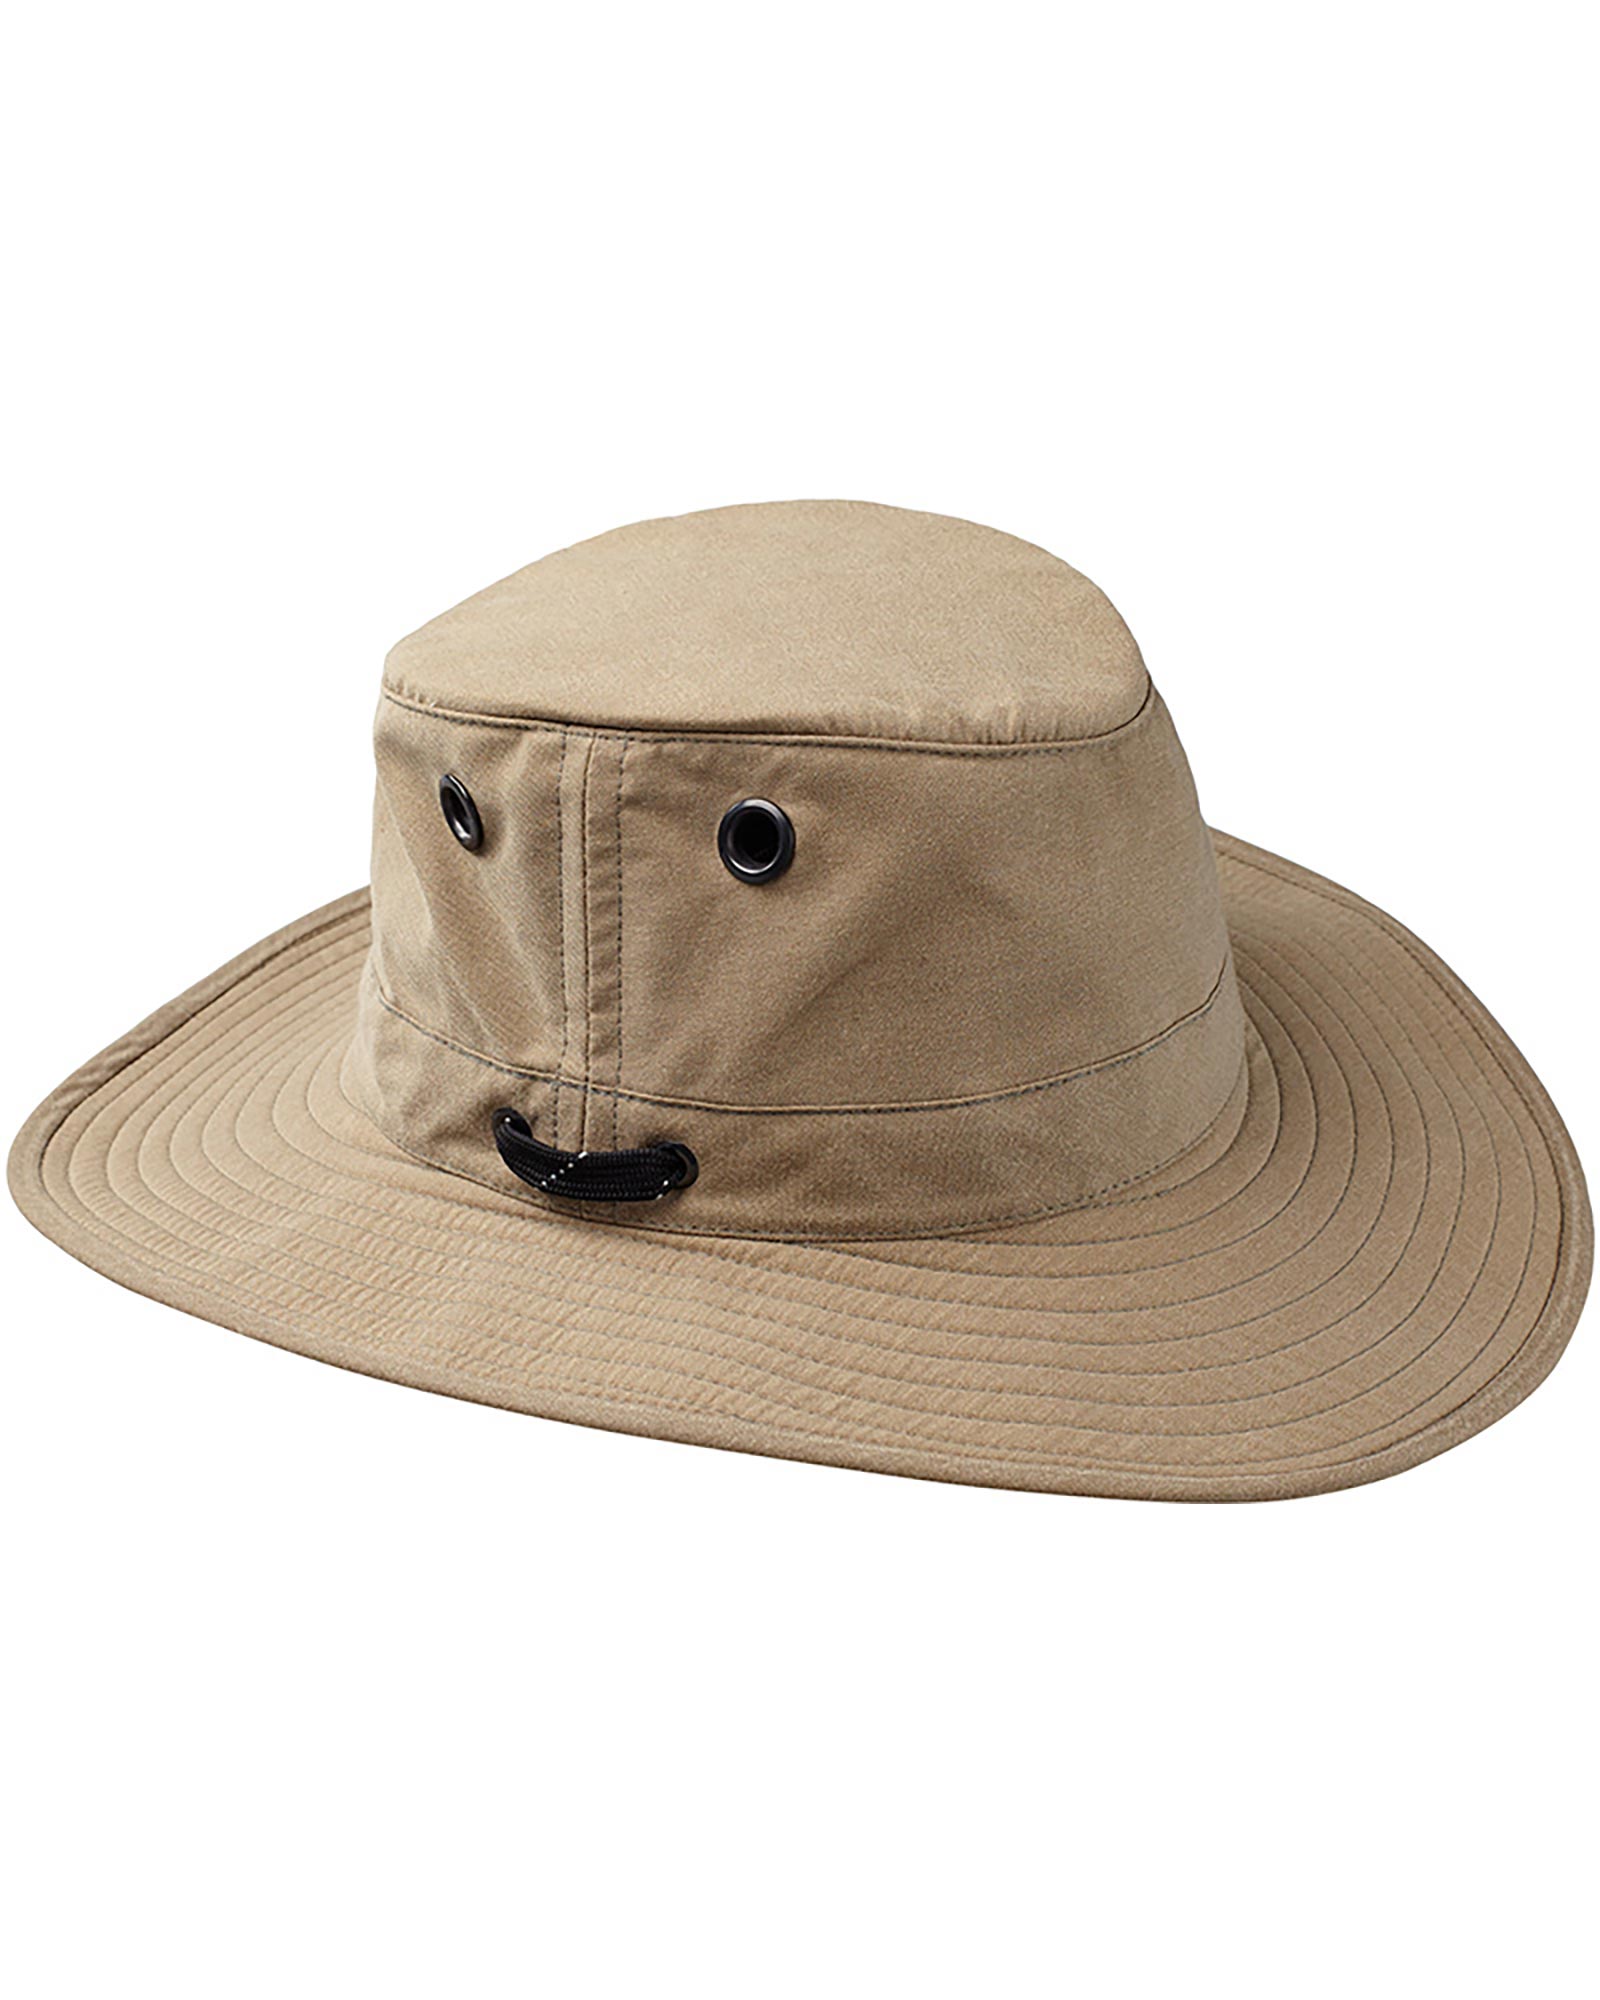 Tilley Waxed Cotton Hat - Tan 7